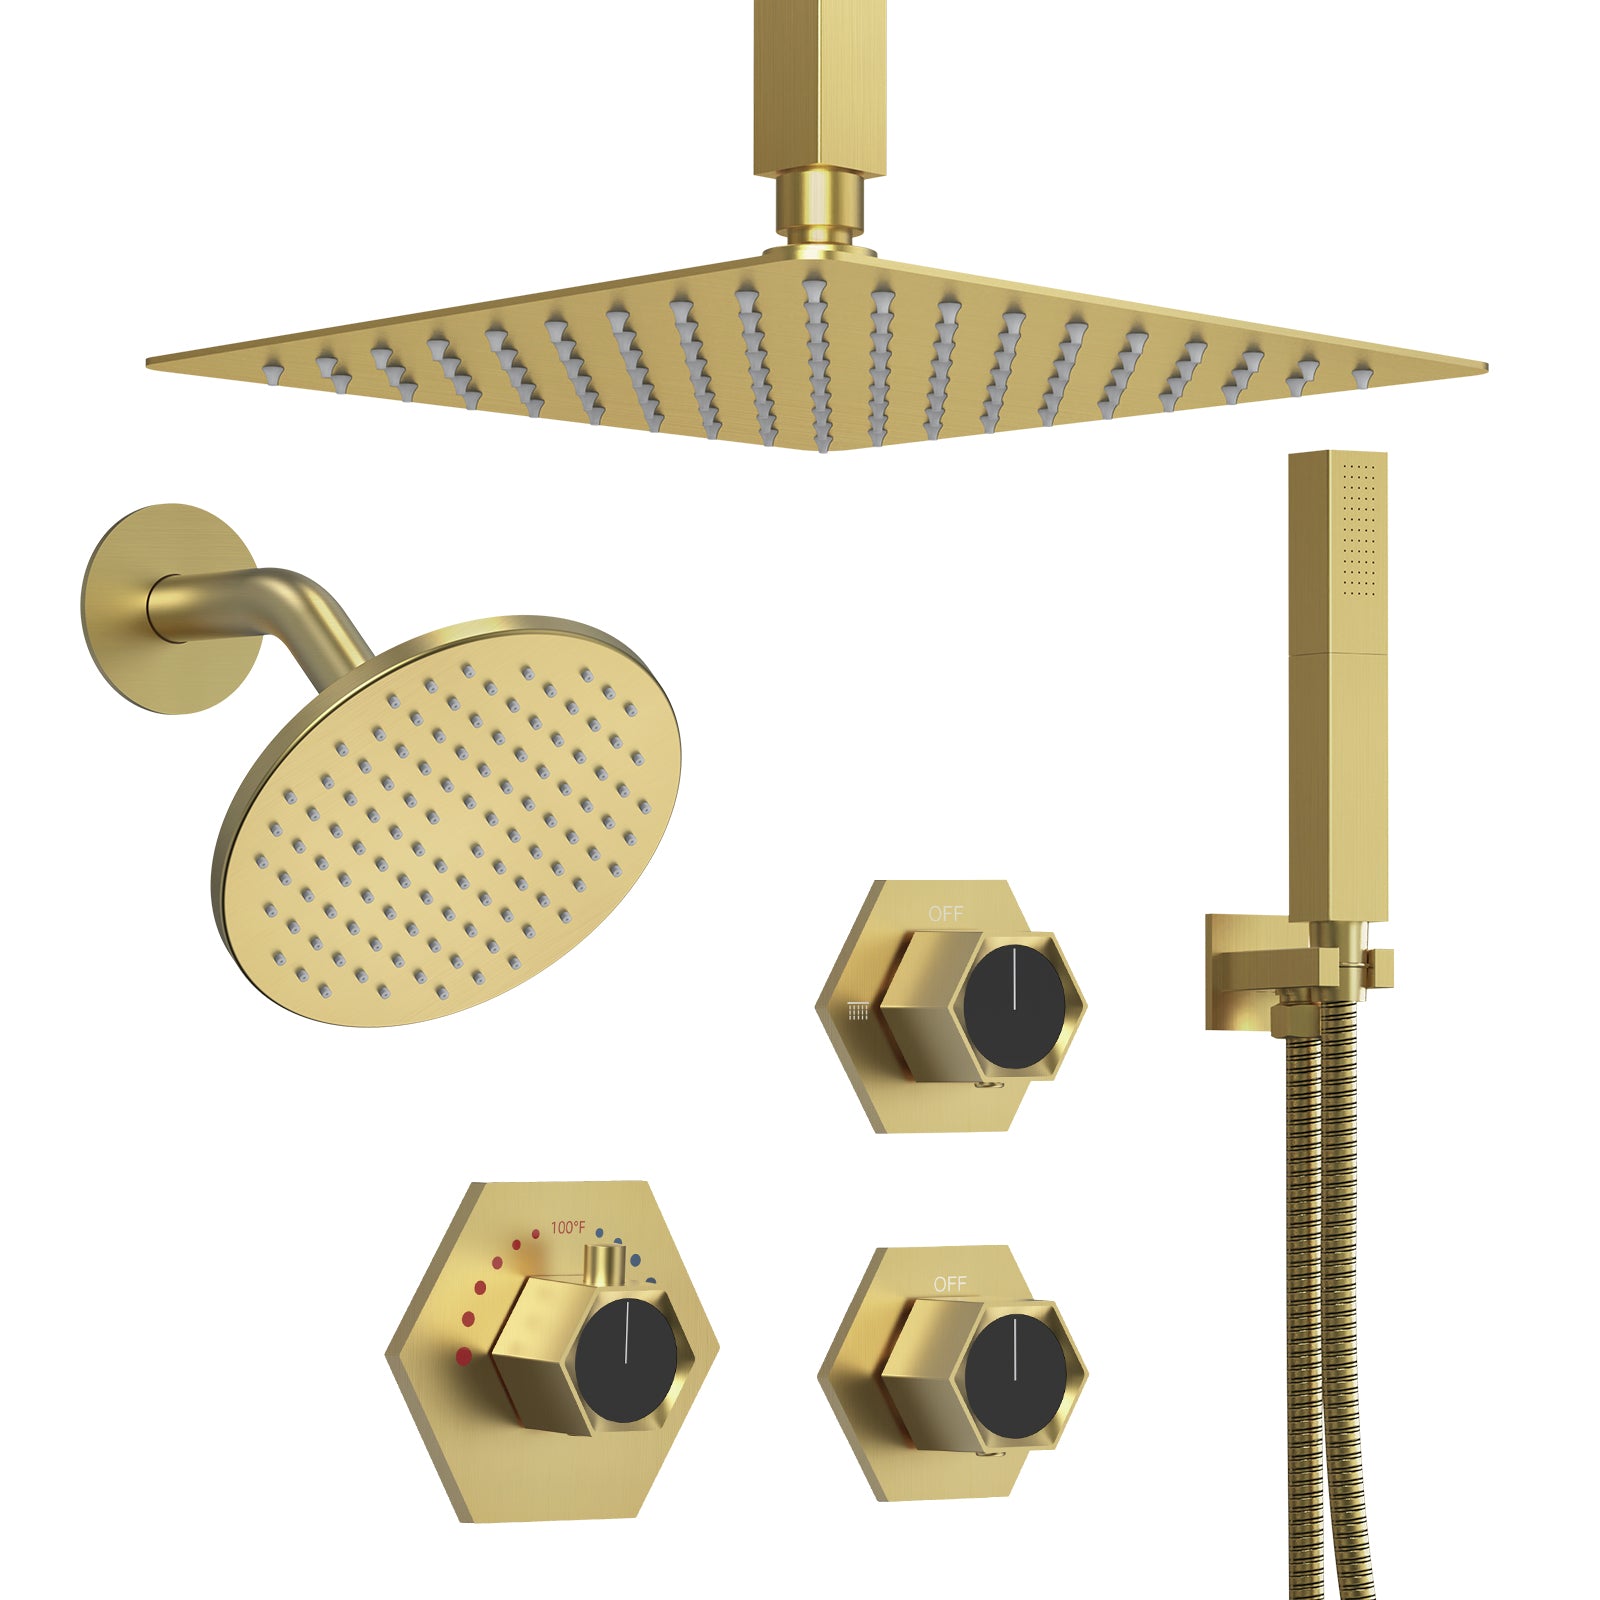 EVERSTEIN Luxury Dual Shower Heads System: Brushed Gold 12" Ceiling Mounted Rain Showerhead Handheld Spray Comb